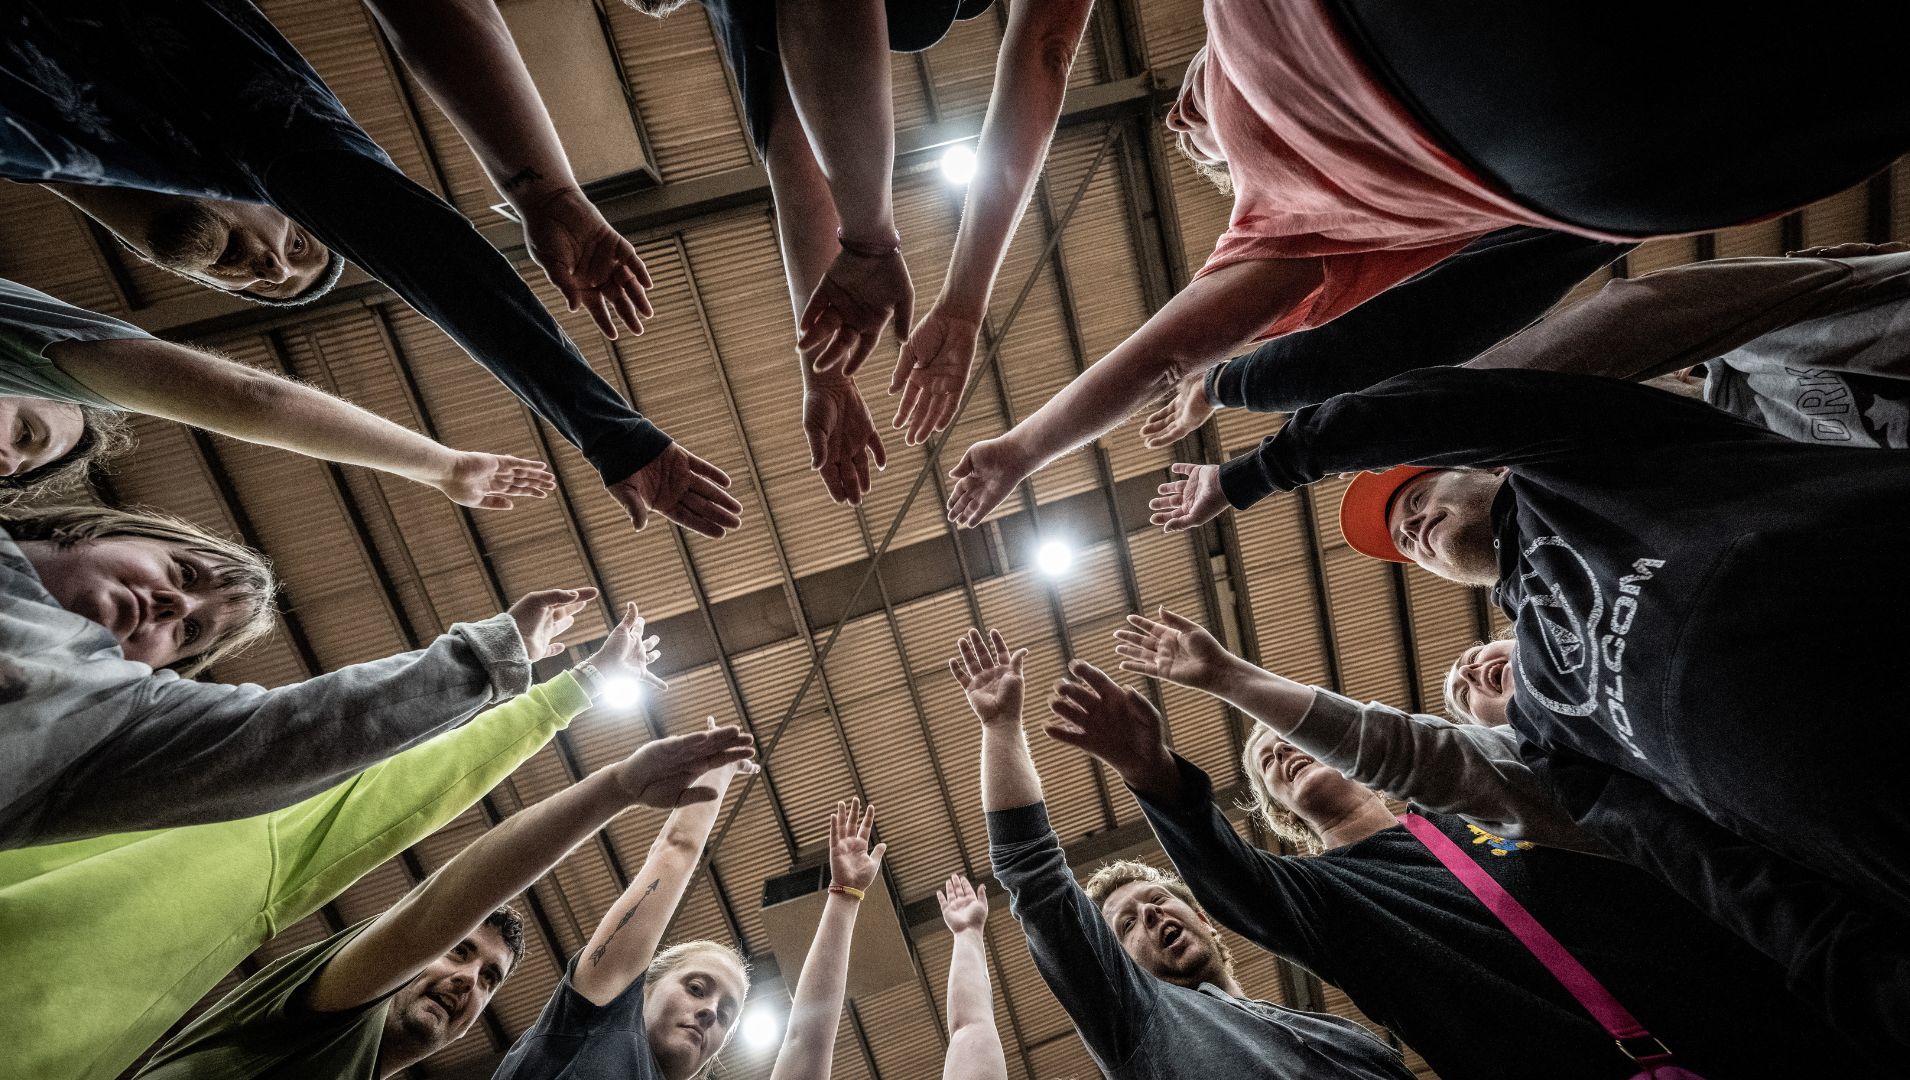 Players form a circle of hands in the all ability basketball team